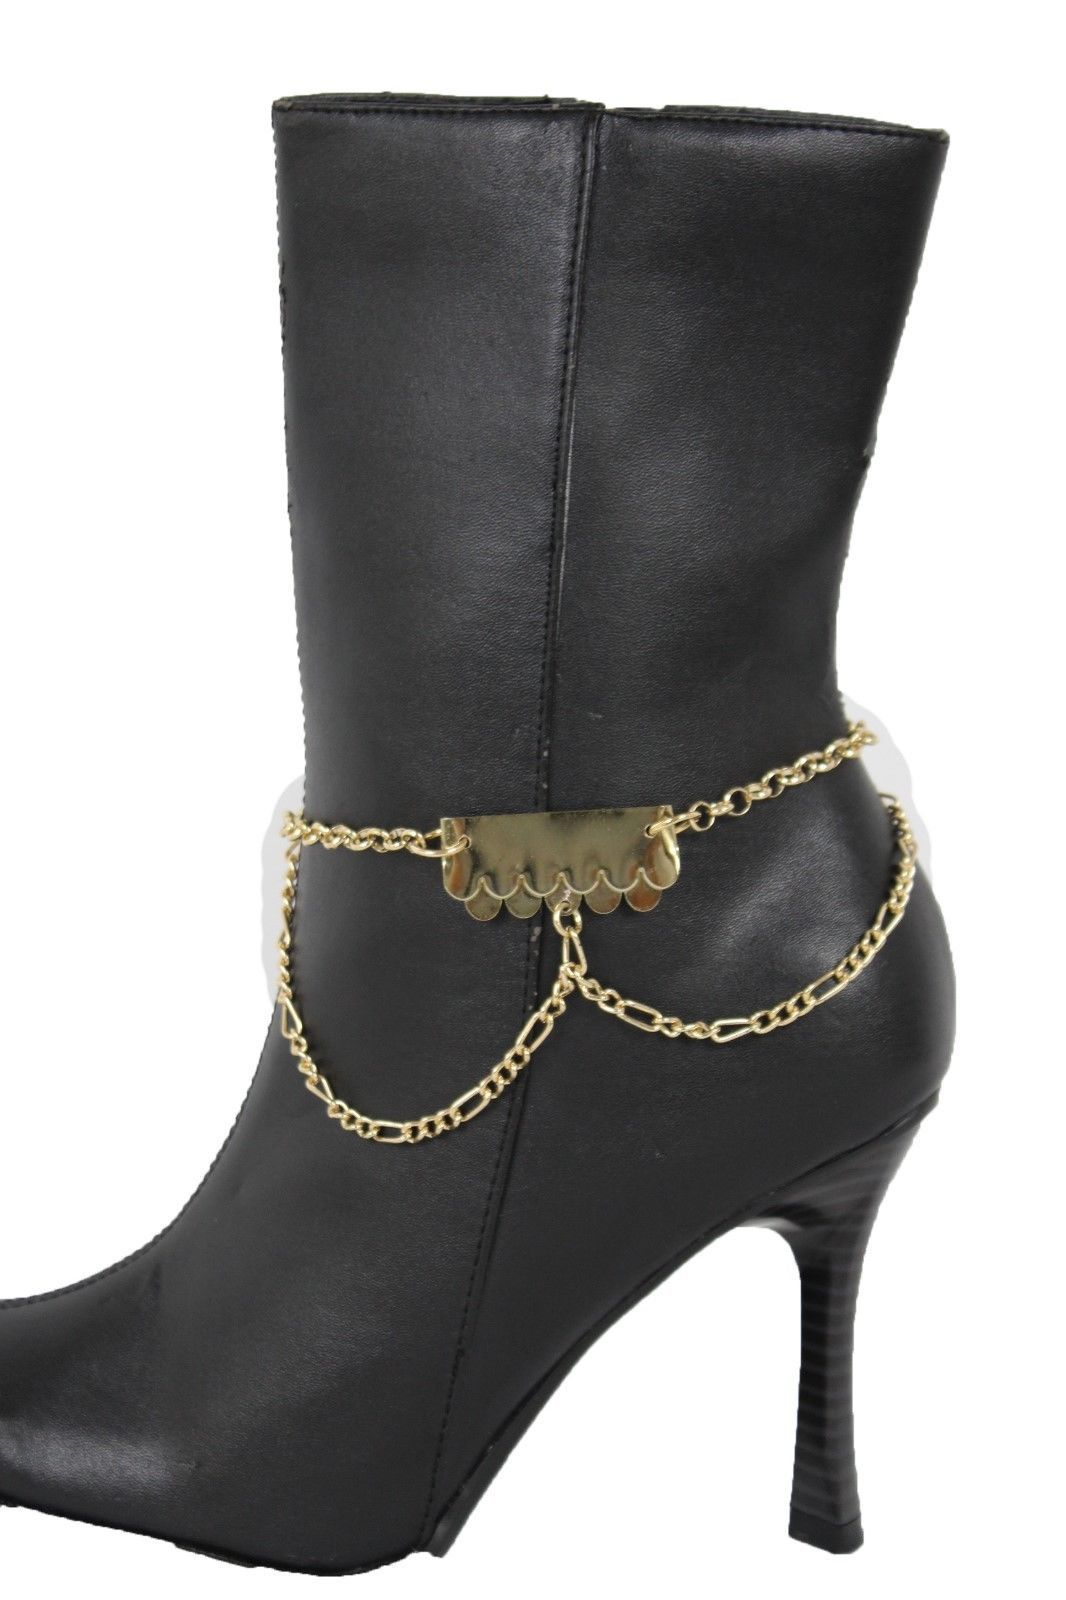 Women Western Boot Anklet Gold Chain Metal Western Shoe Waves Drapes Bling Charm - $17.63